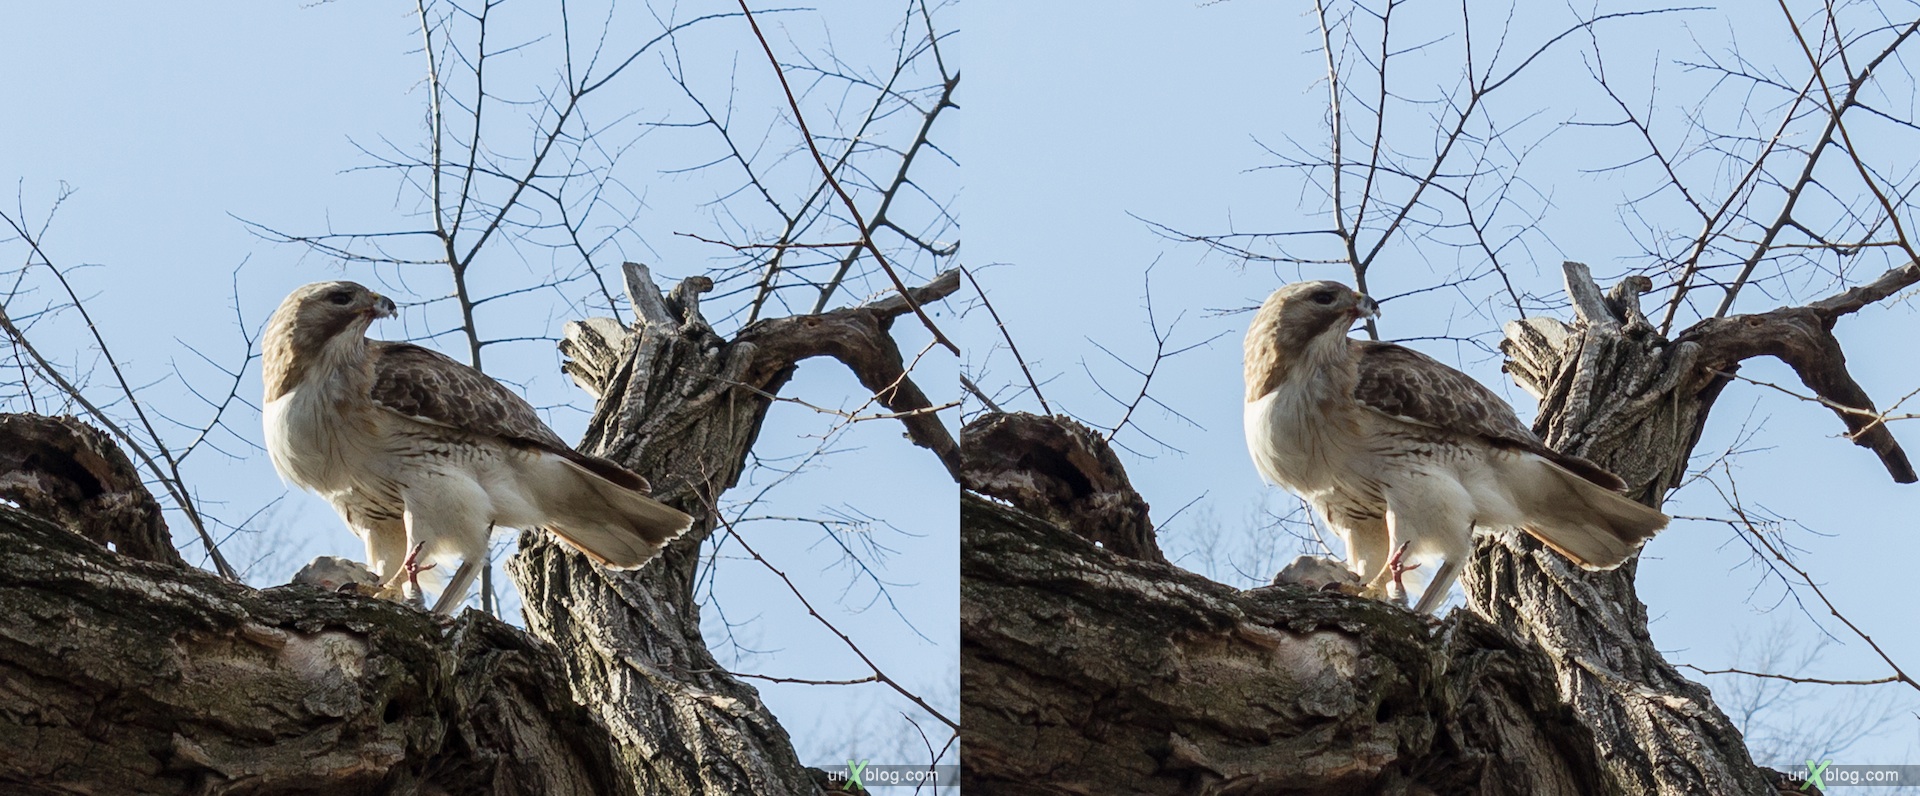 2013, red-tailed hawk, eagle, bird, NYC, New York, Manhattan, USA, 3D, stereo pair, cross-eyed, crossview, cross view stereo pair, stereoscopic